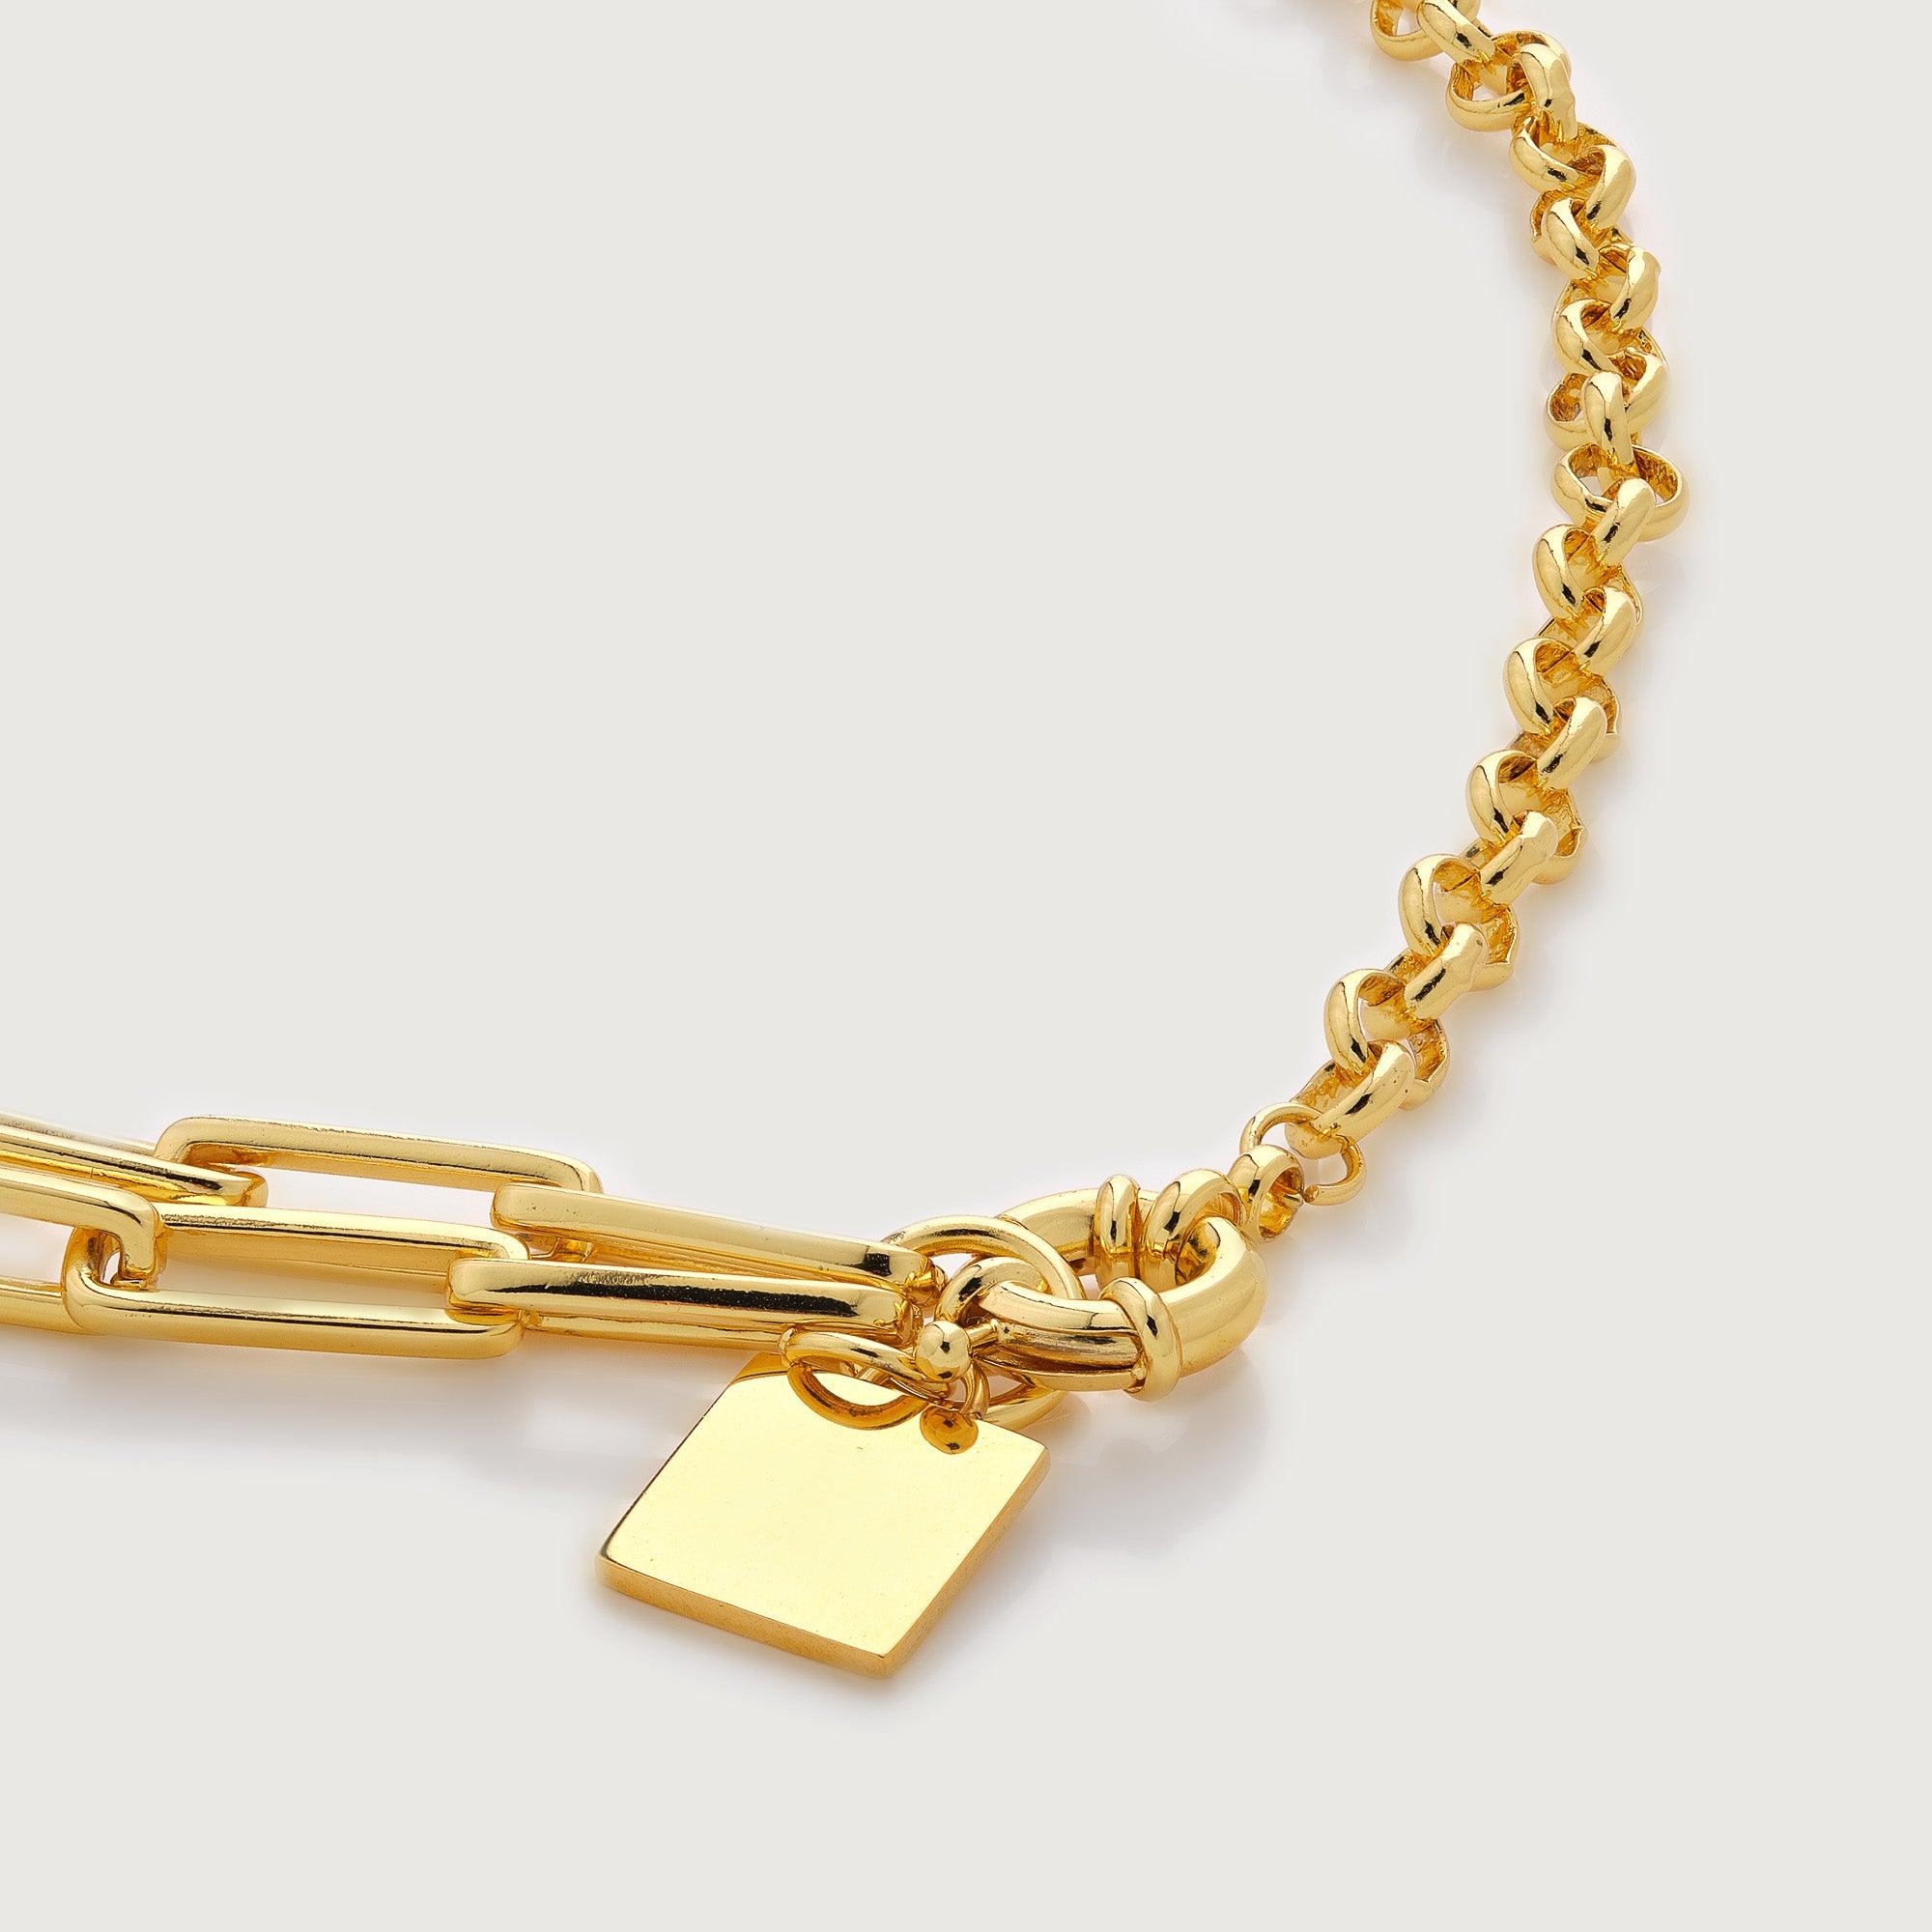 Motley Chain Necklace